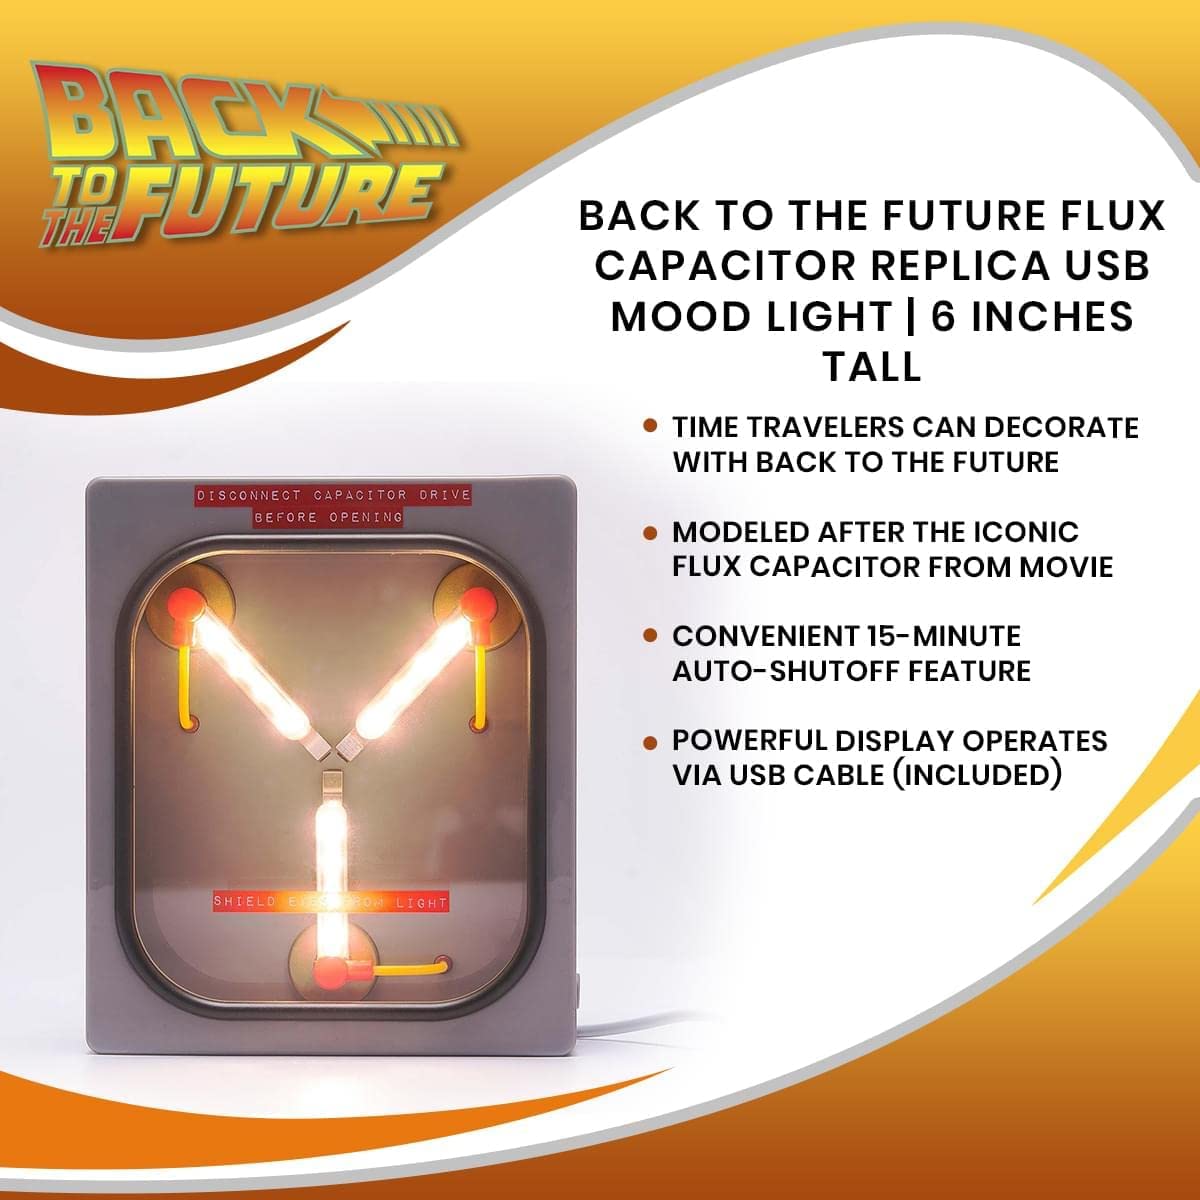 Detailed product information for the Back to the Future Flux Capacitor replica mood light.